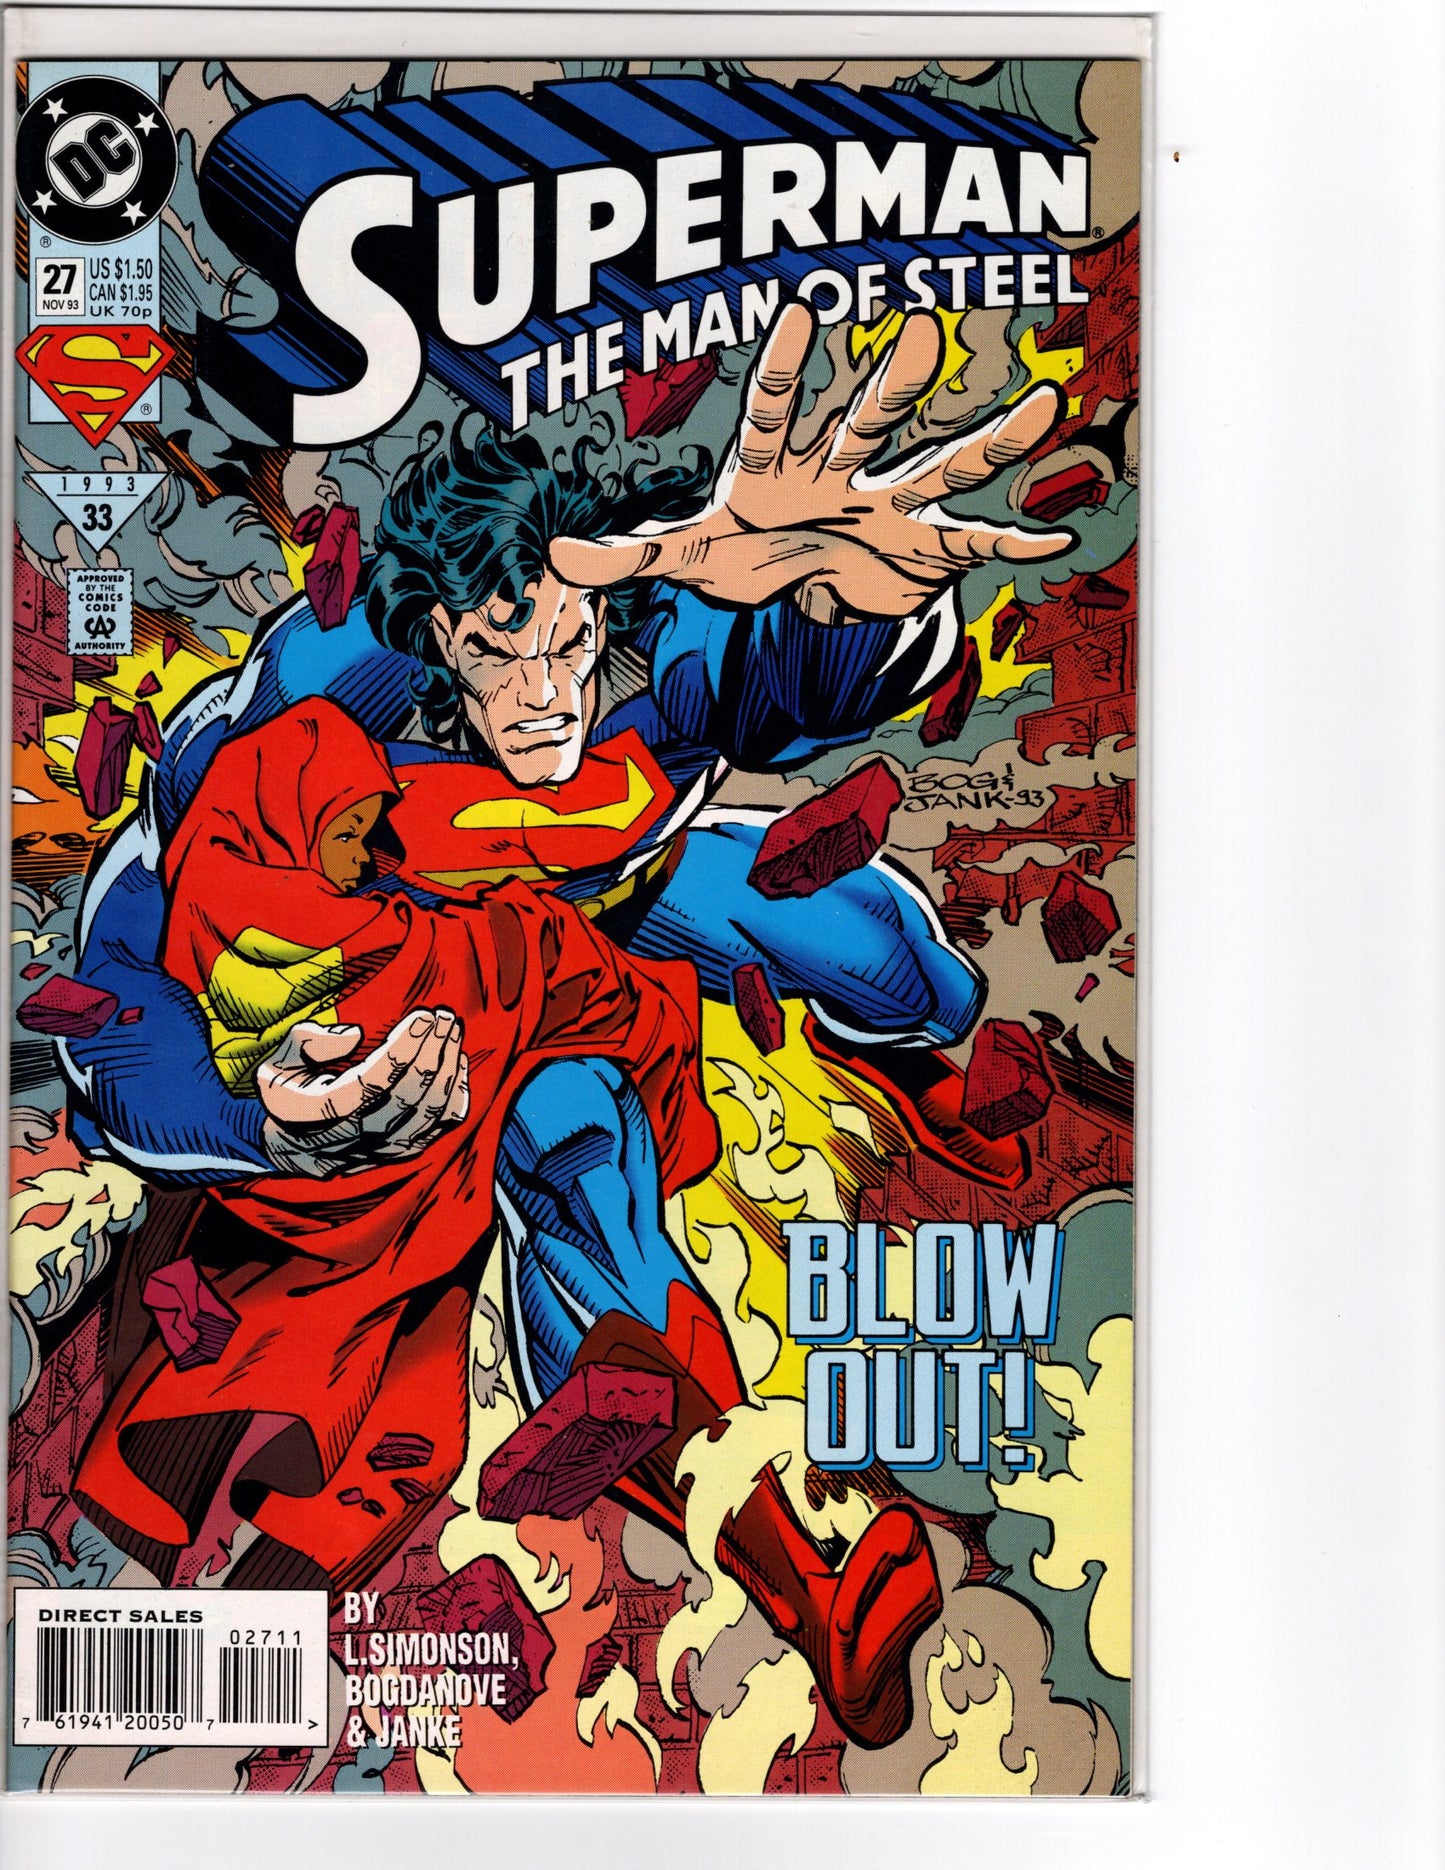 Superman - The Man of Steel No. 27